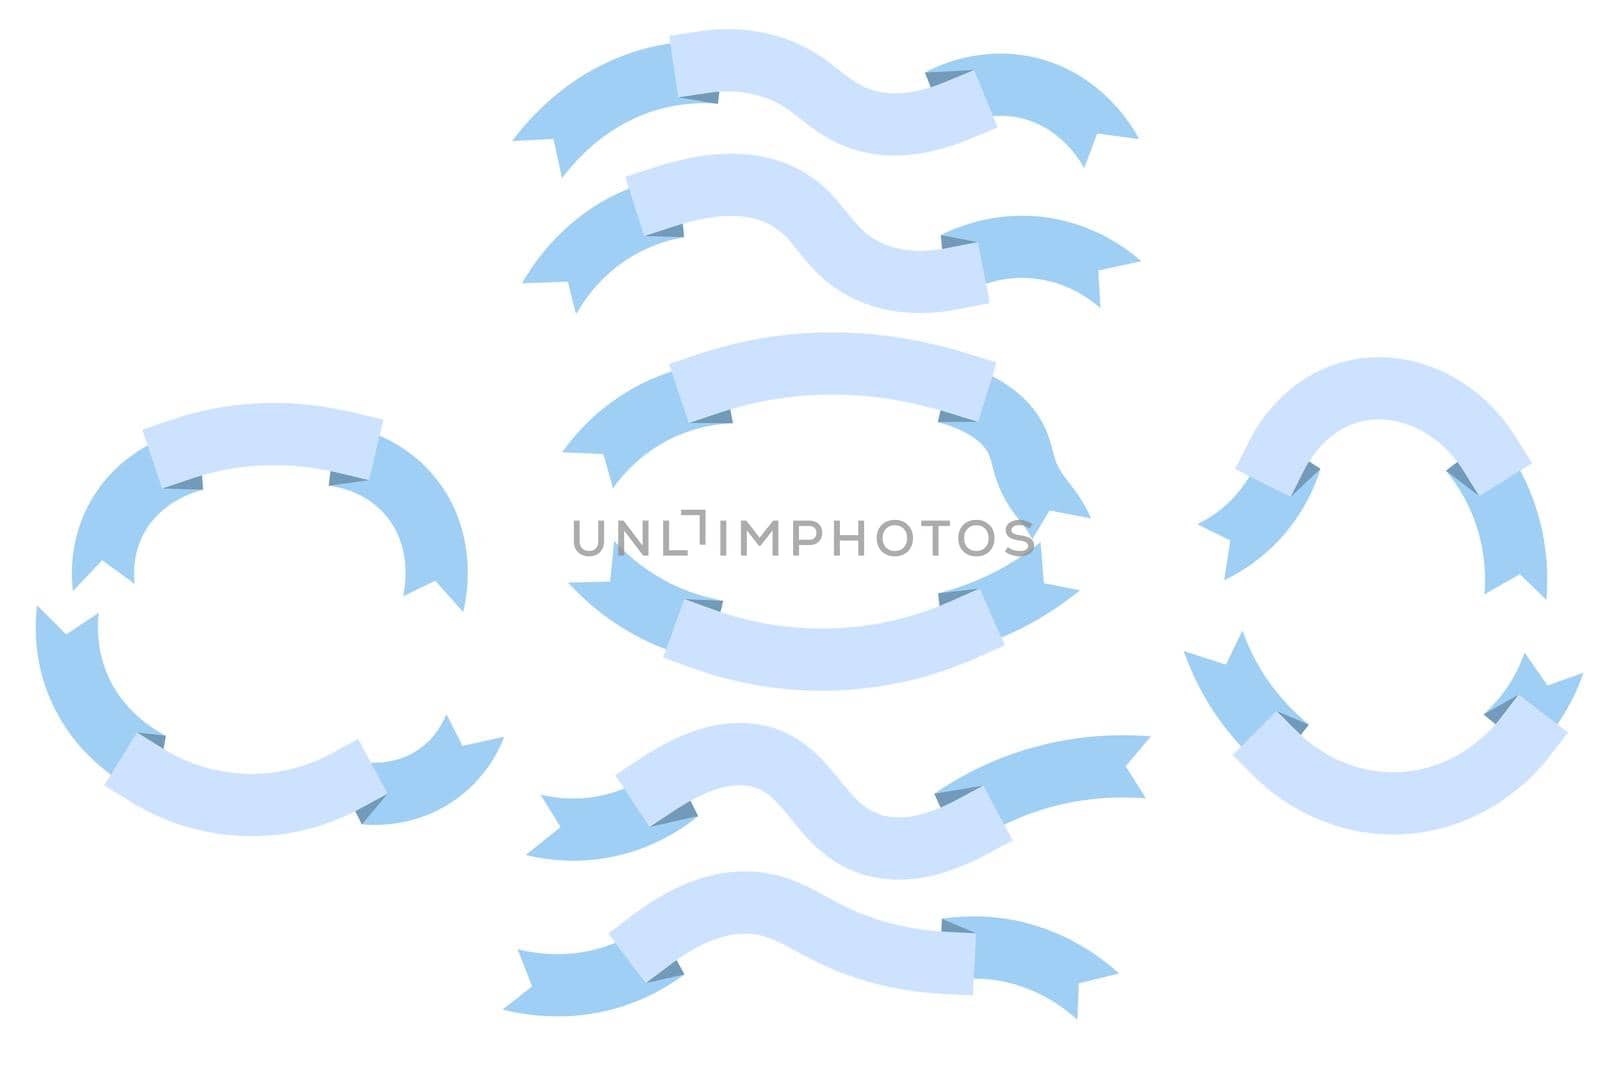 Set of blue silhouette flat ribbons isolated on white background. Ribbon banner vector illustration. Hand drawn lace